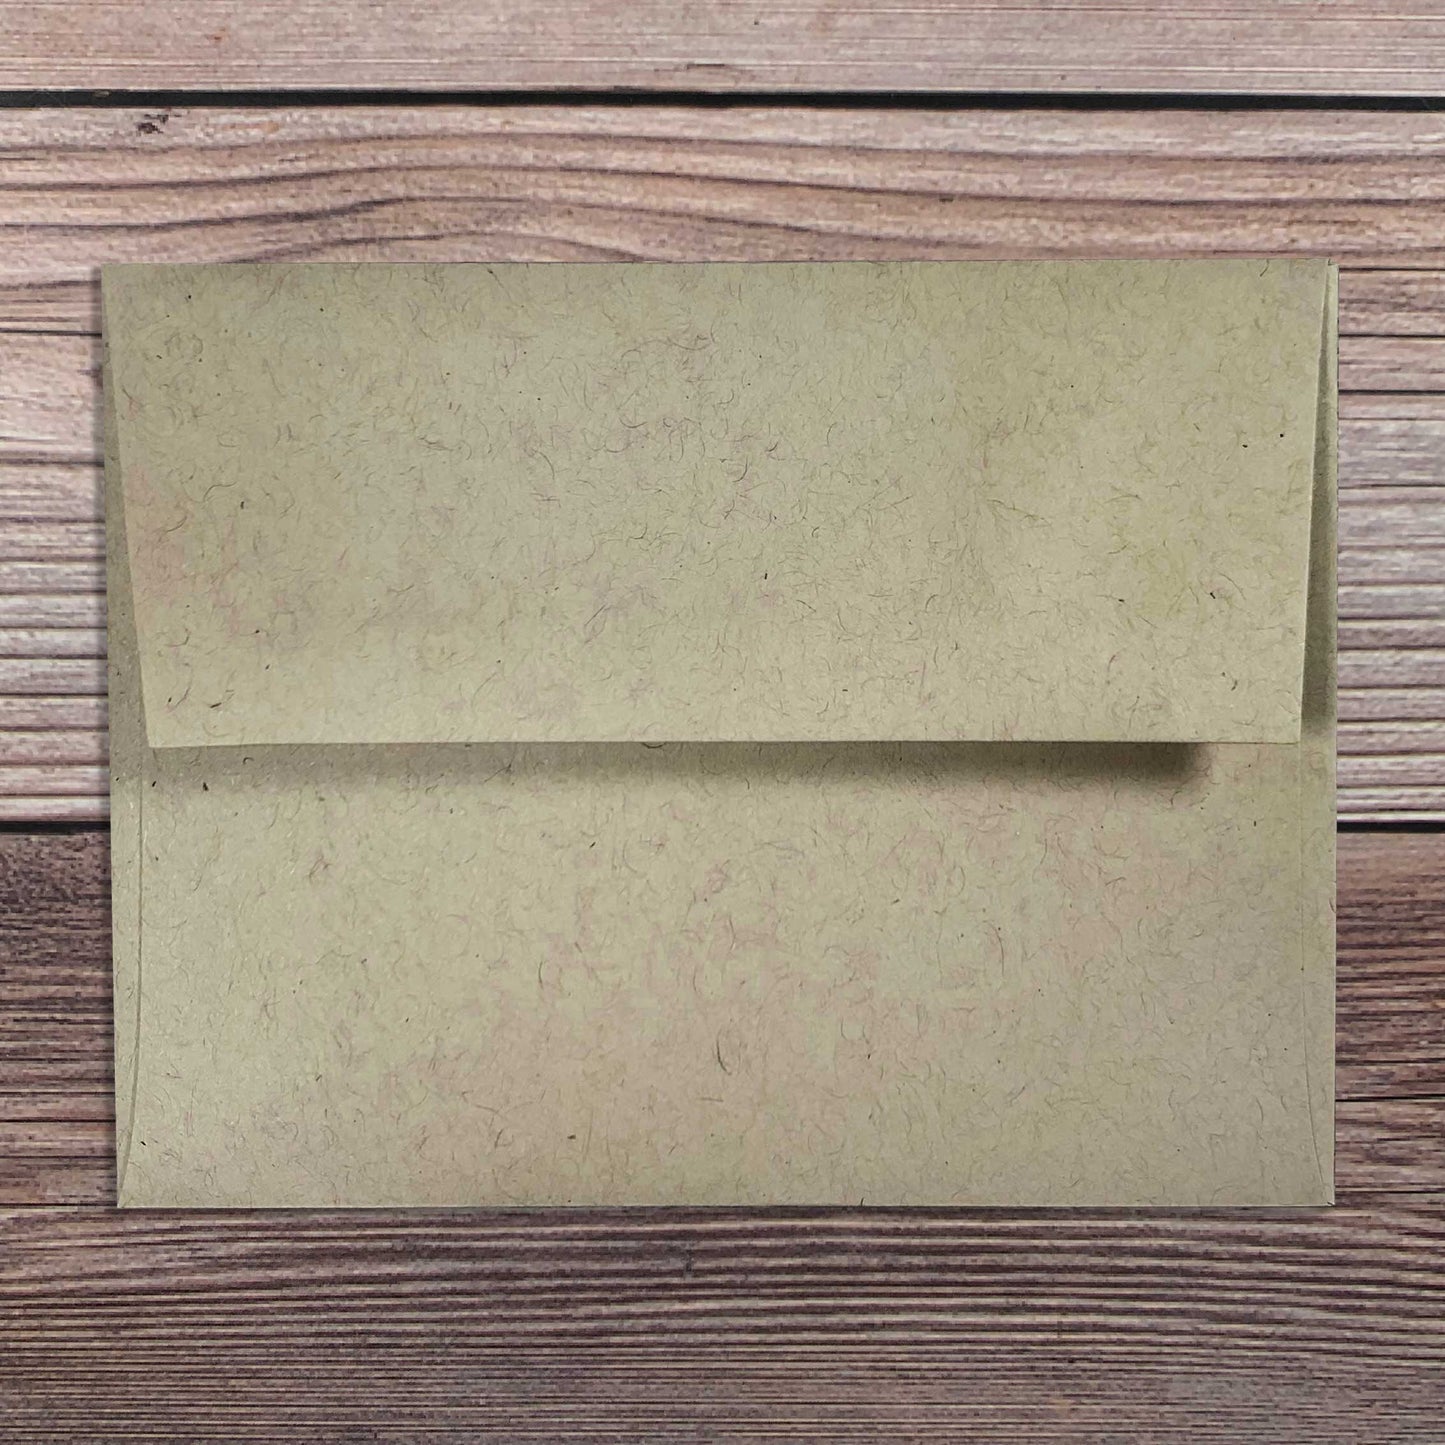 Greeting Card envelope, kraft color, square flap, included with letterpress Christmas greeting card